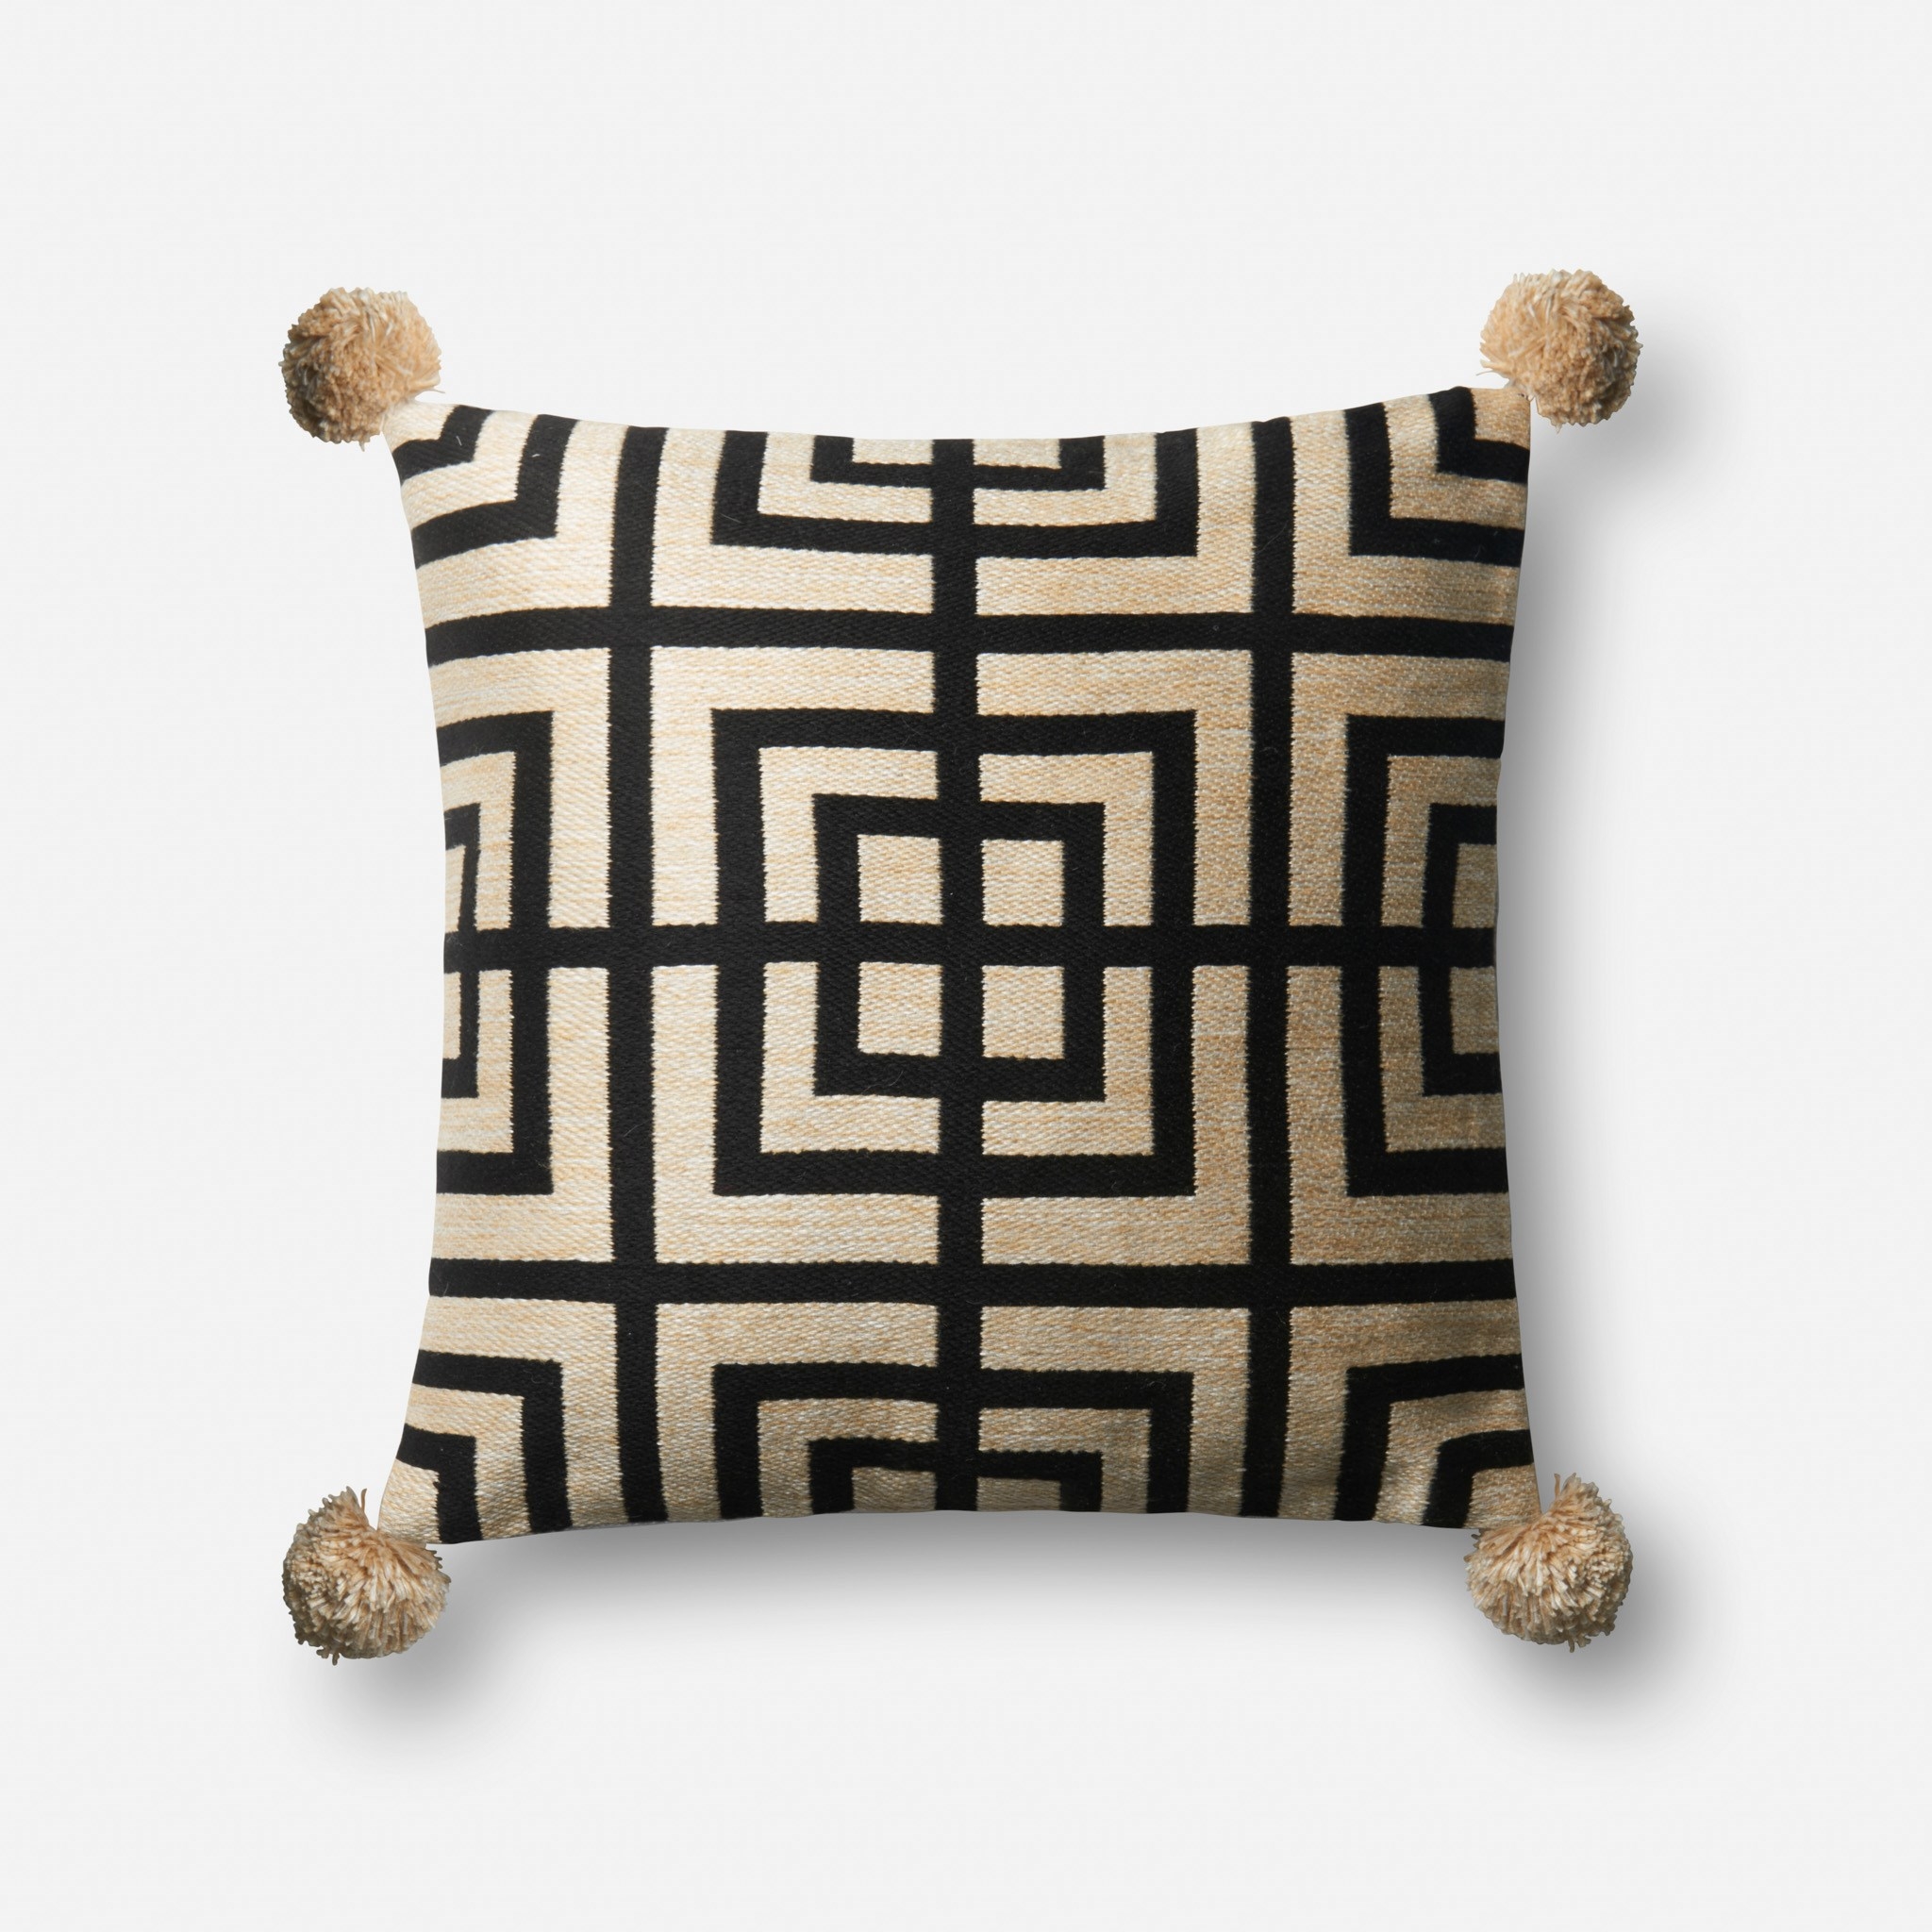 PILLOWS - BEIGE / BLACK - 18" X 18" Cover Only - Image 0